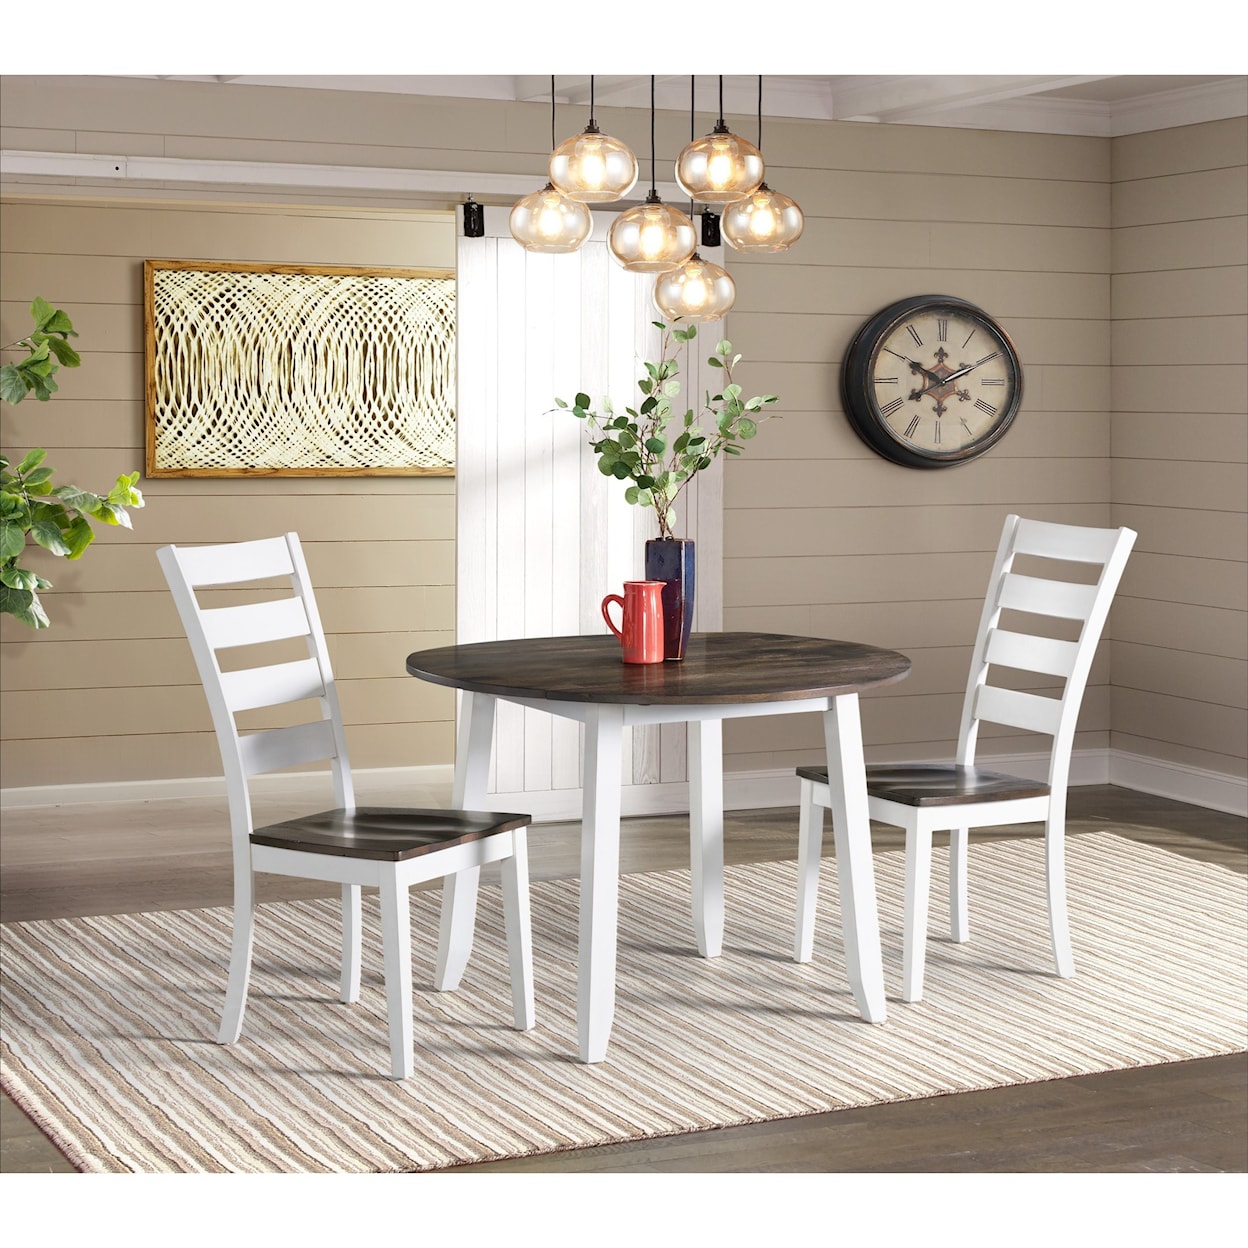 Intercon Kona Drop Leaf Dining Table and Chair Set